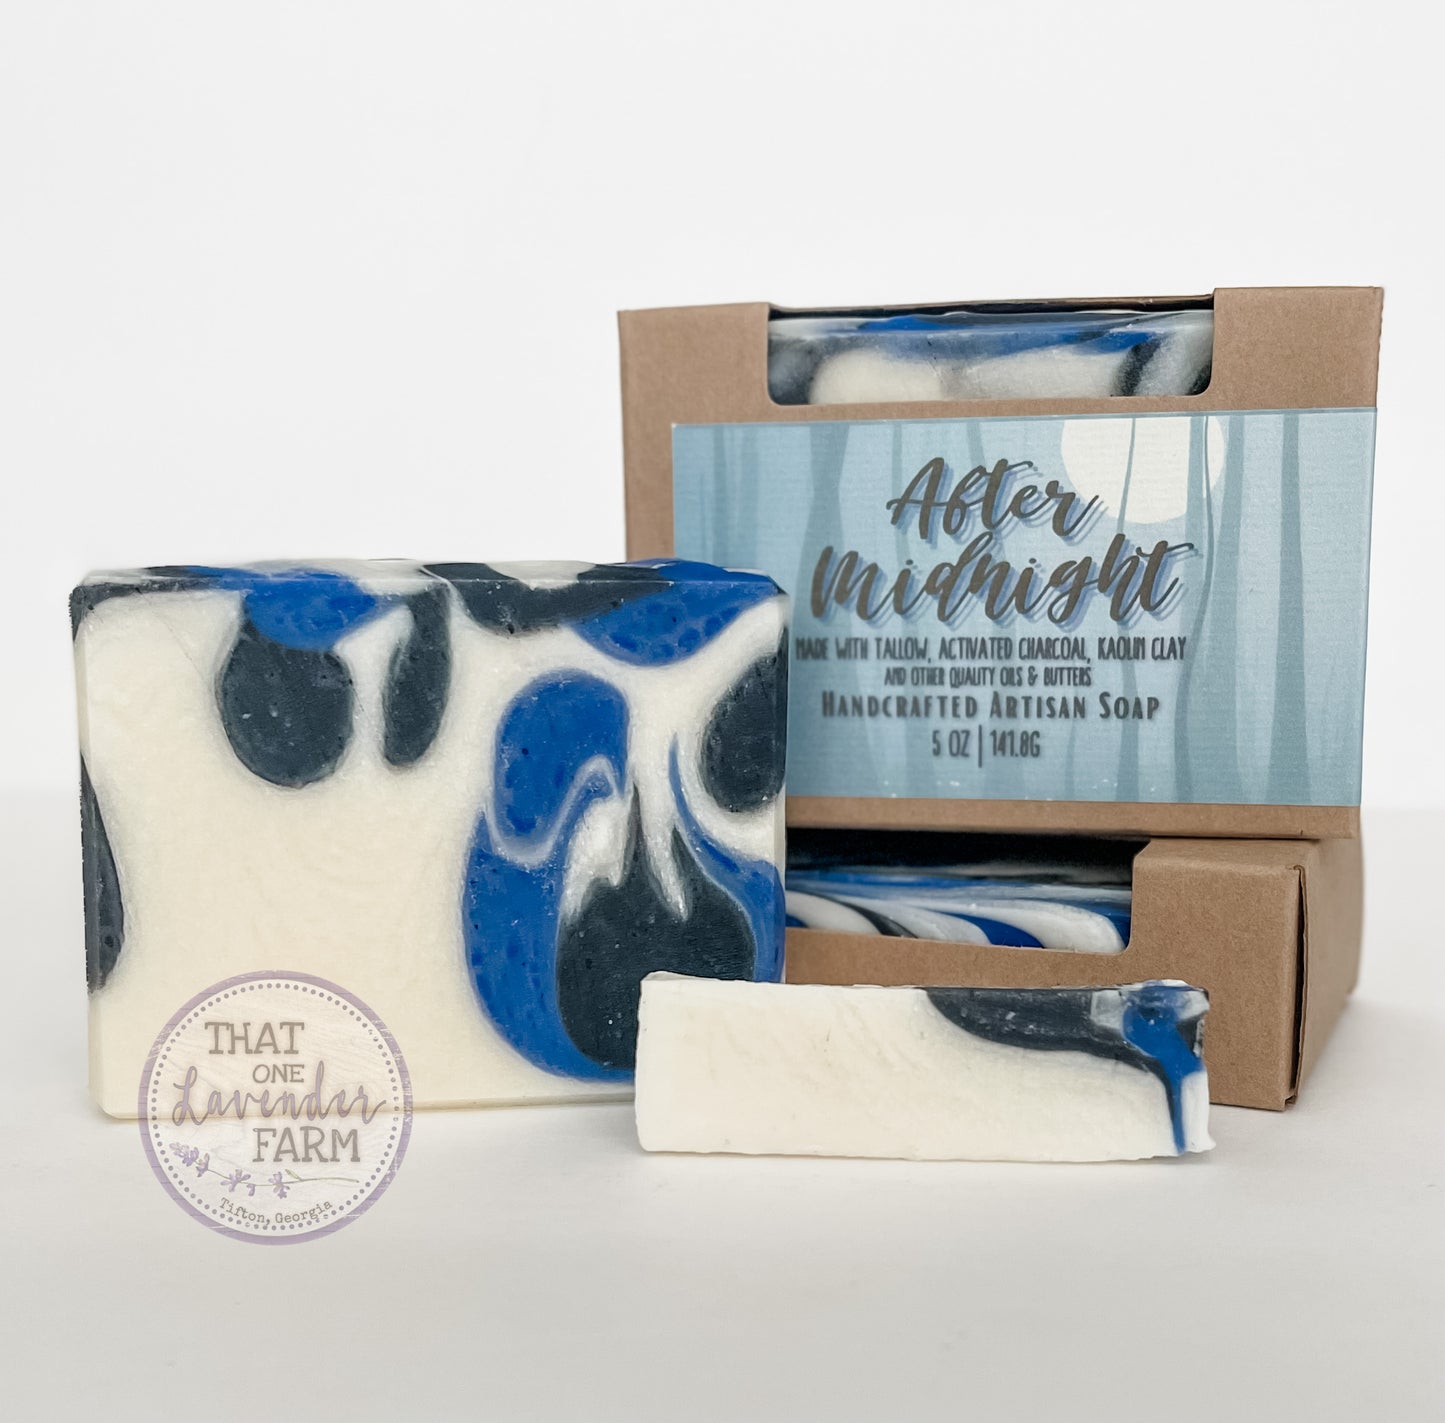 After Midnight Handcrafted Artisan Soap (7177386328241)